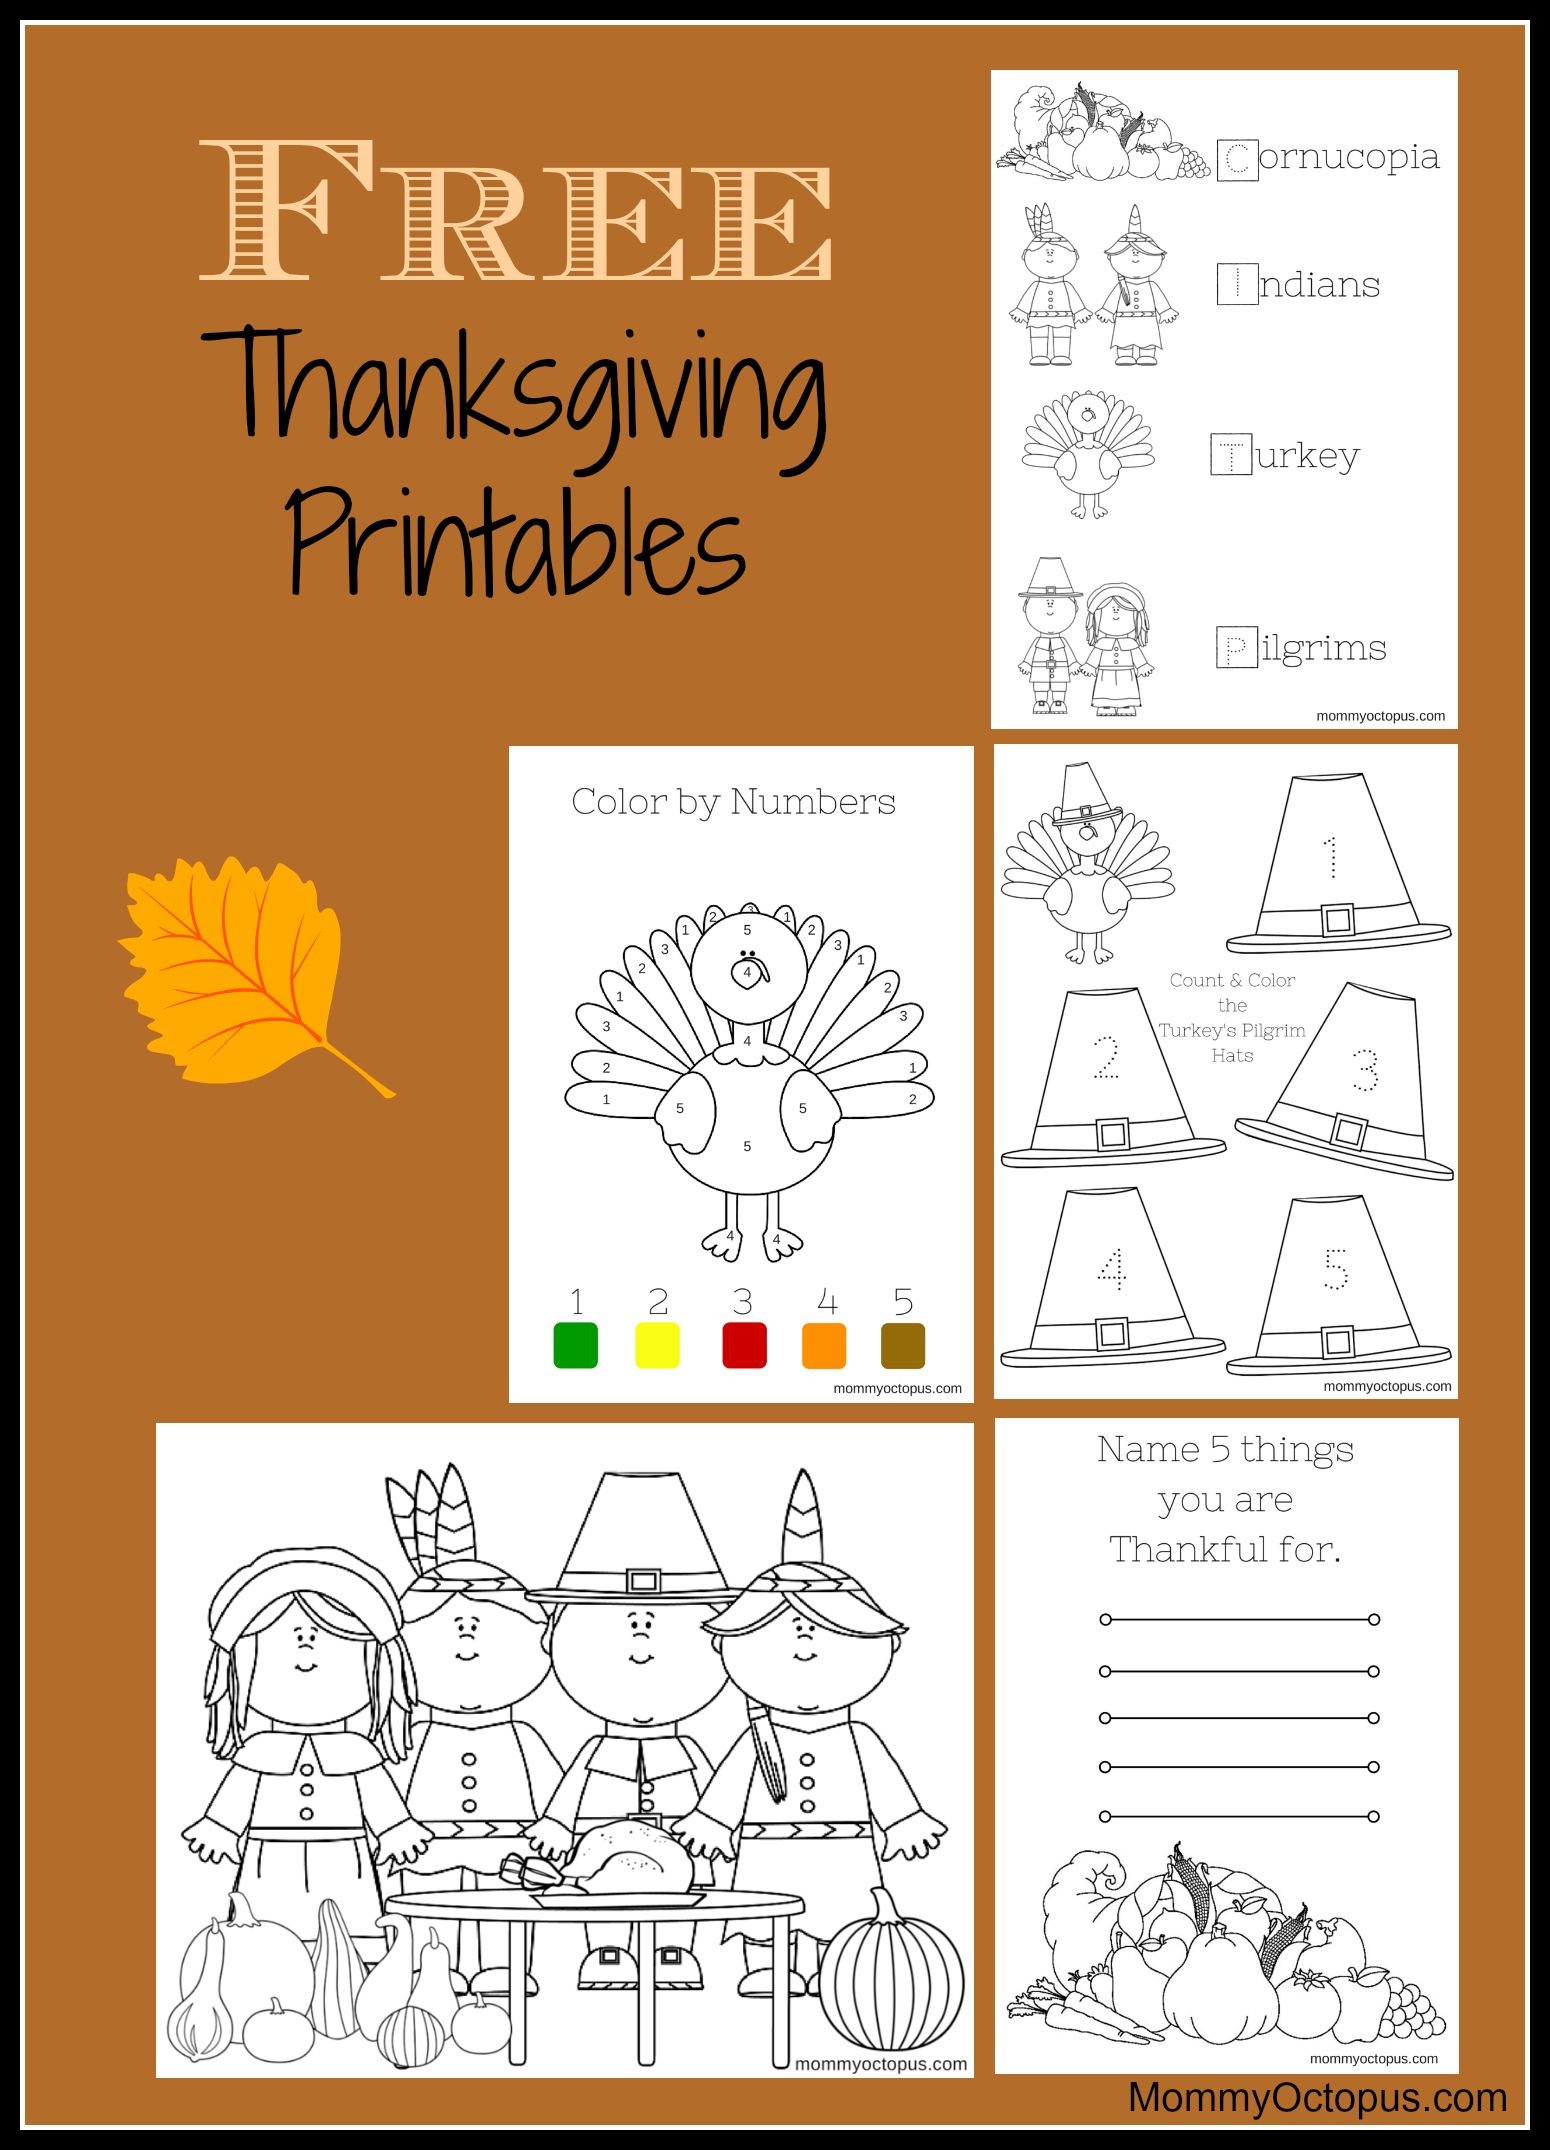 Free Thanksgiving Printable Activity Sheets! | Thanksgiving &amp;amp; Fall - Free Printable Thanksgiving Games For Adults